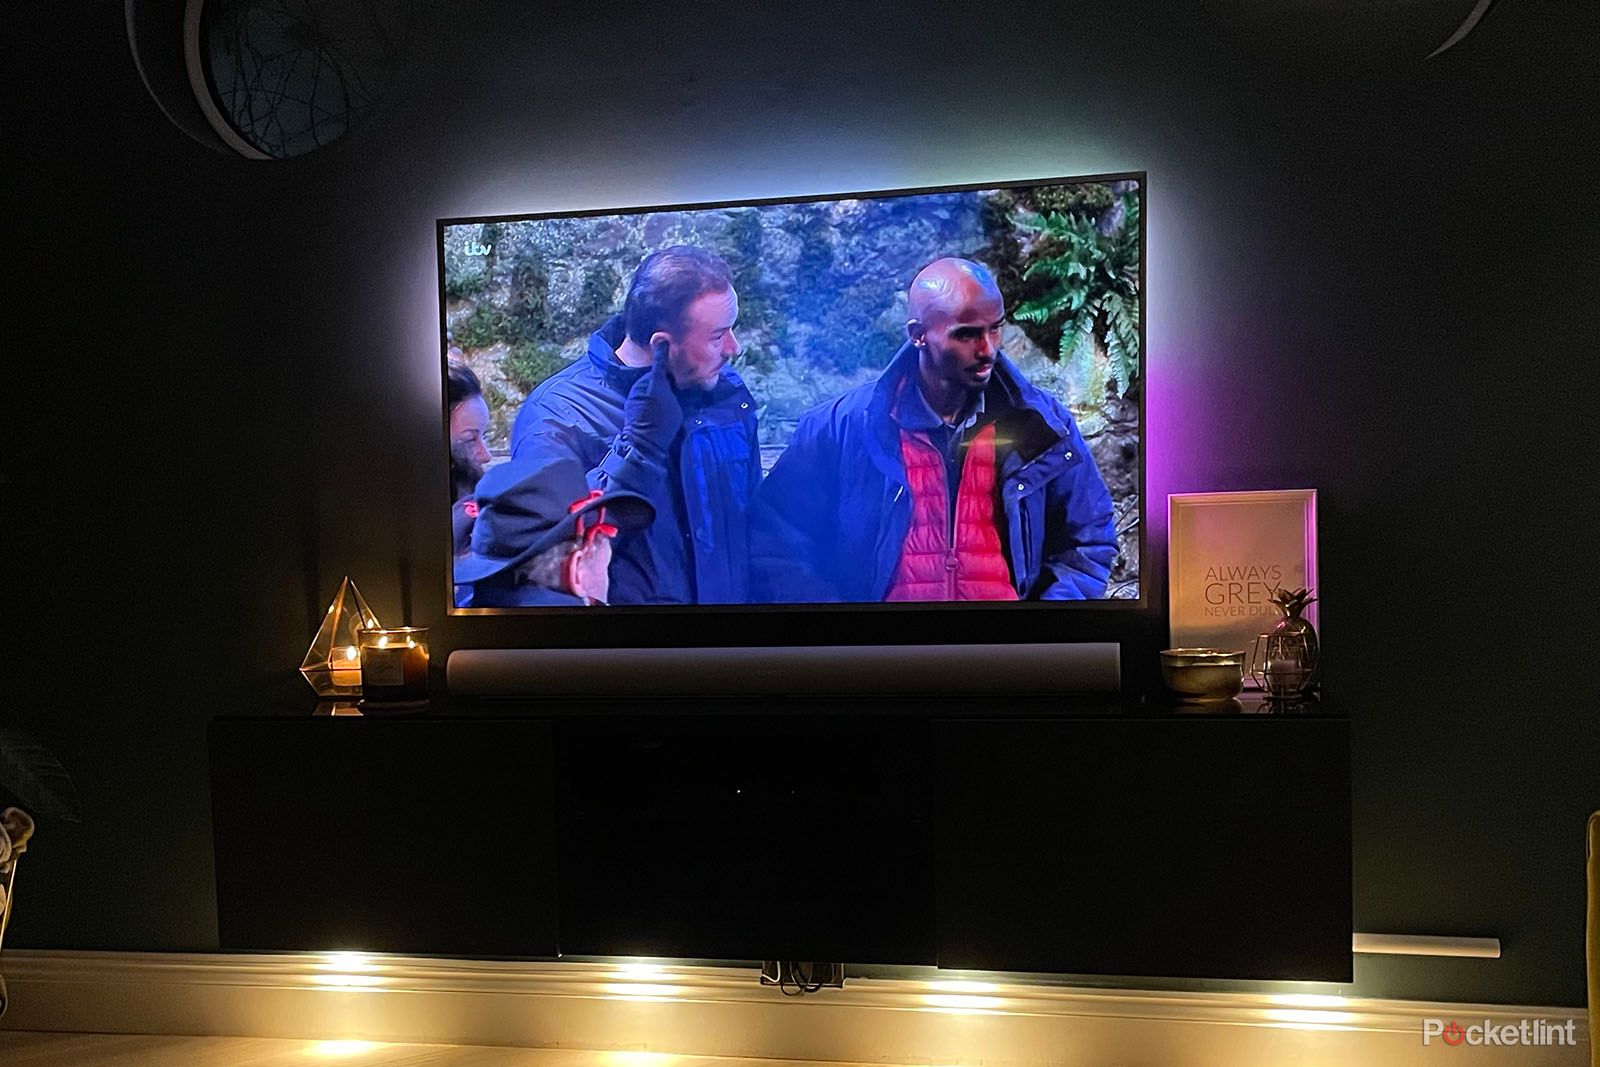  Philips Hue Gradient LightStrip 65 (Sync with TV